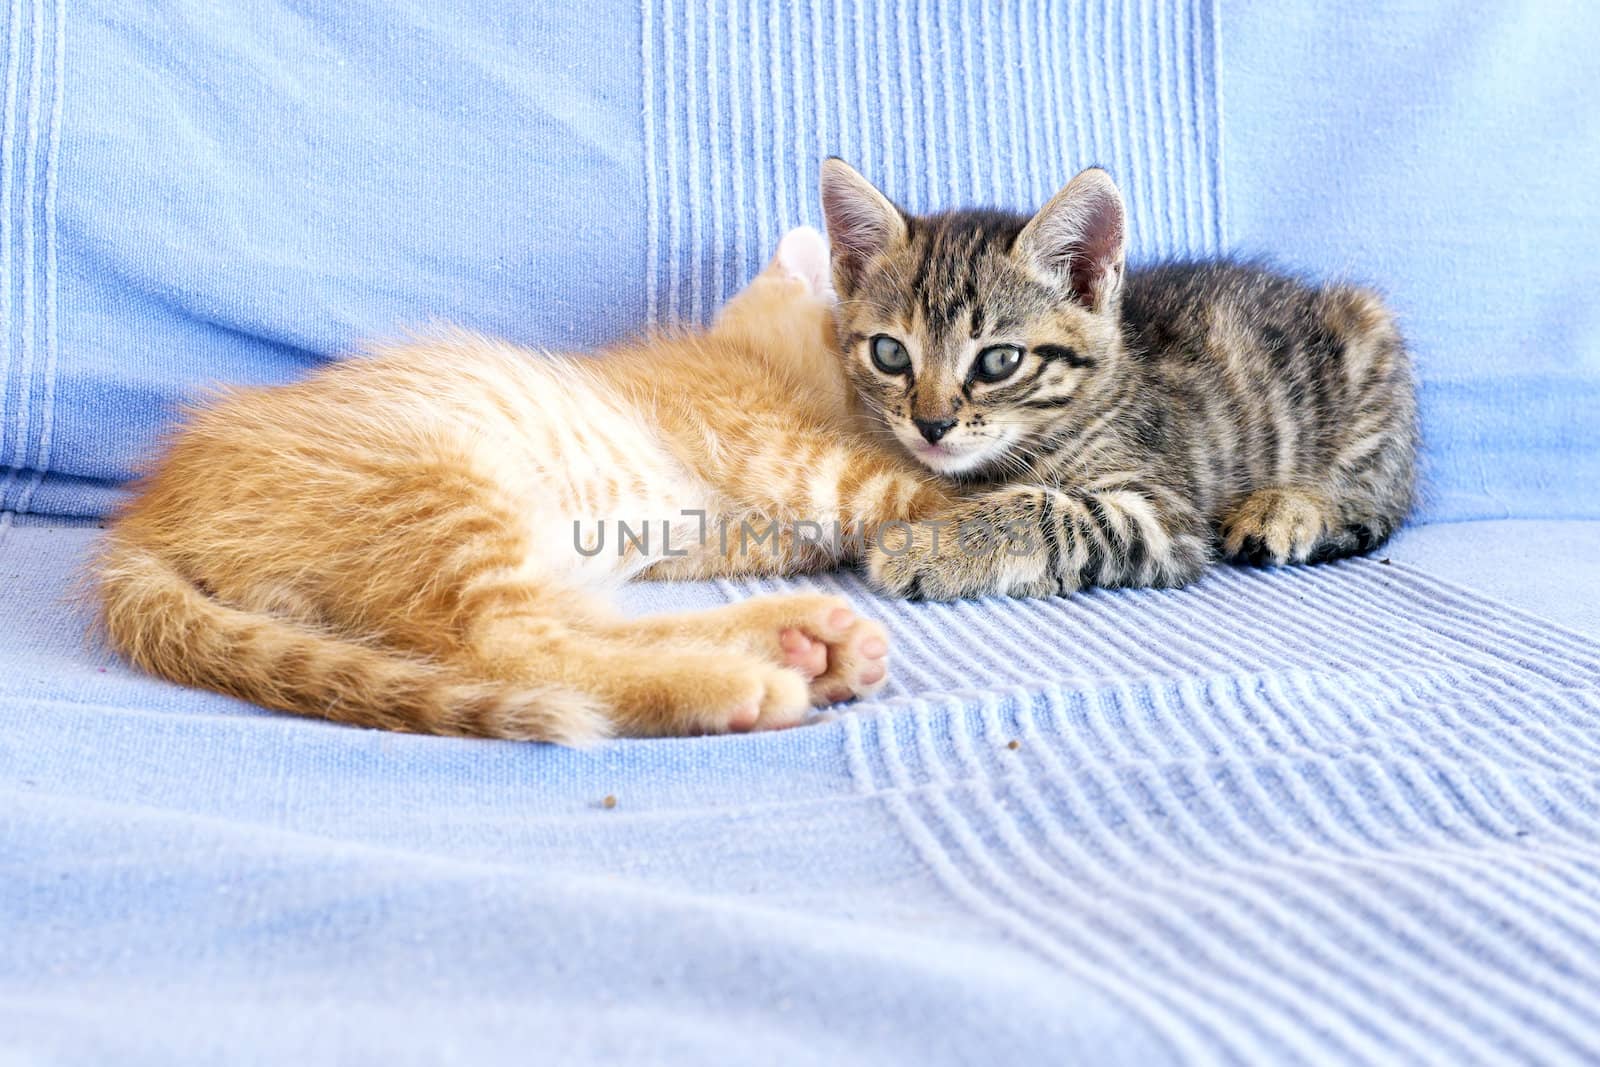 Little kittens on a couch by devy